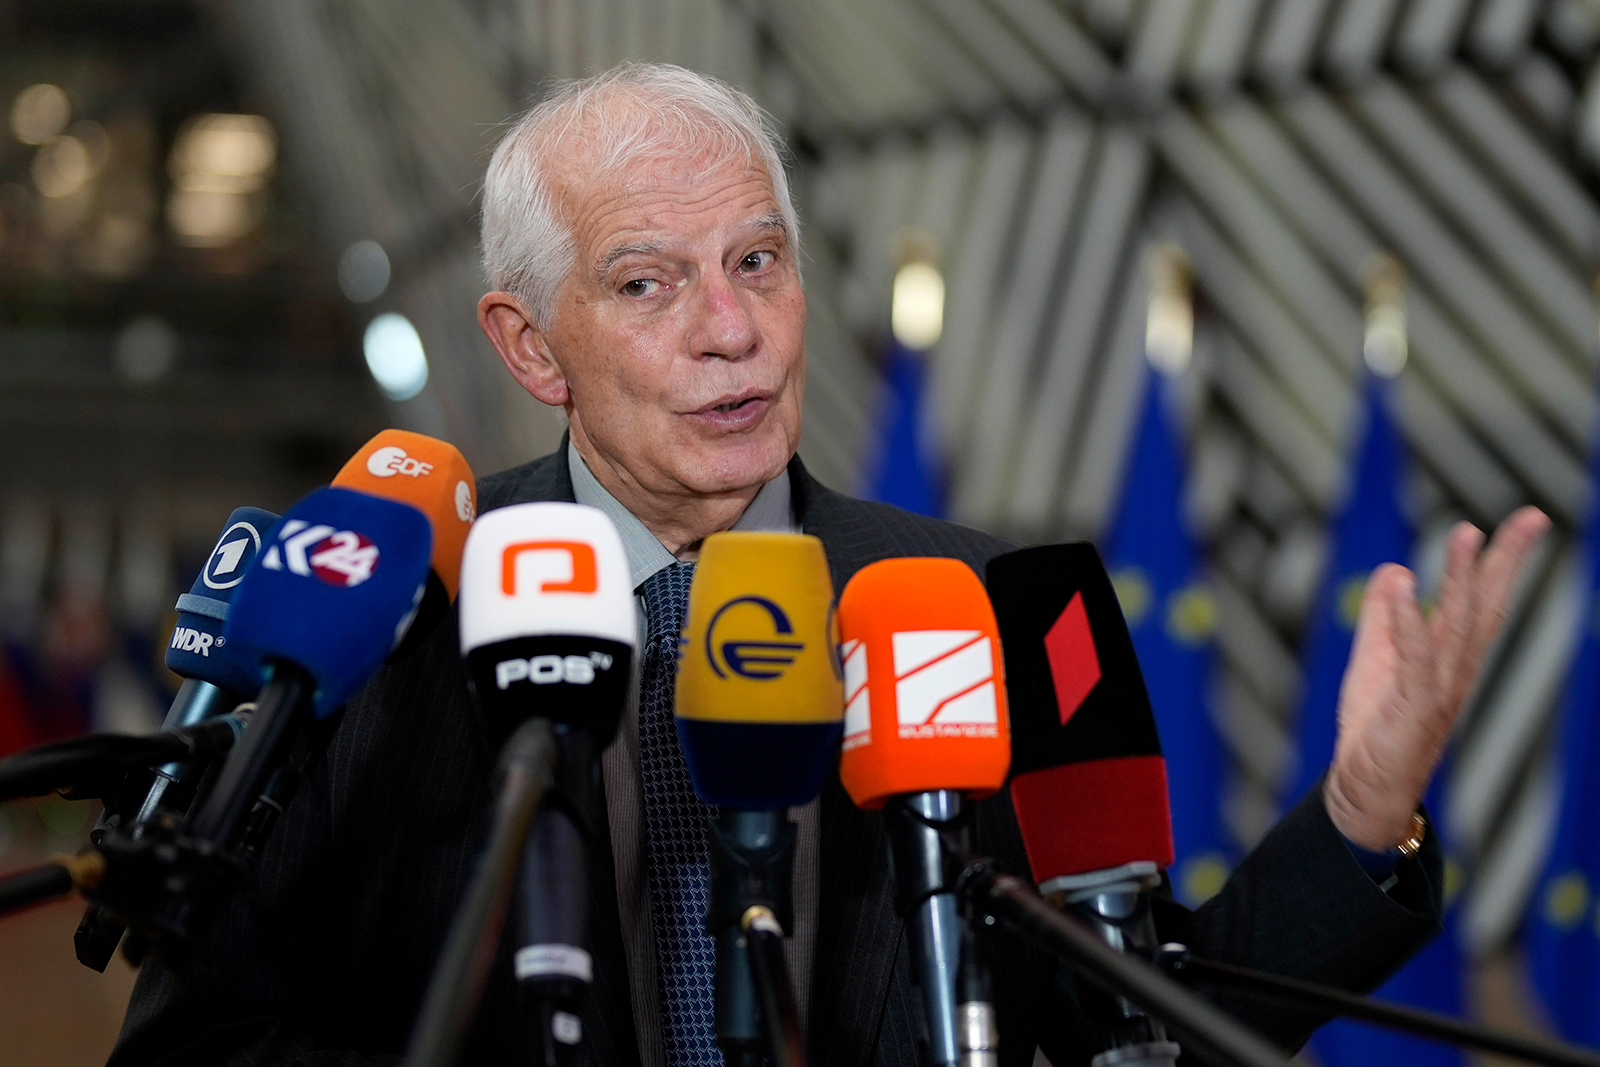 Josep Borrell speaks with the media in Brussels on December 11.